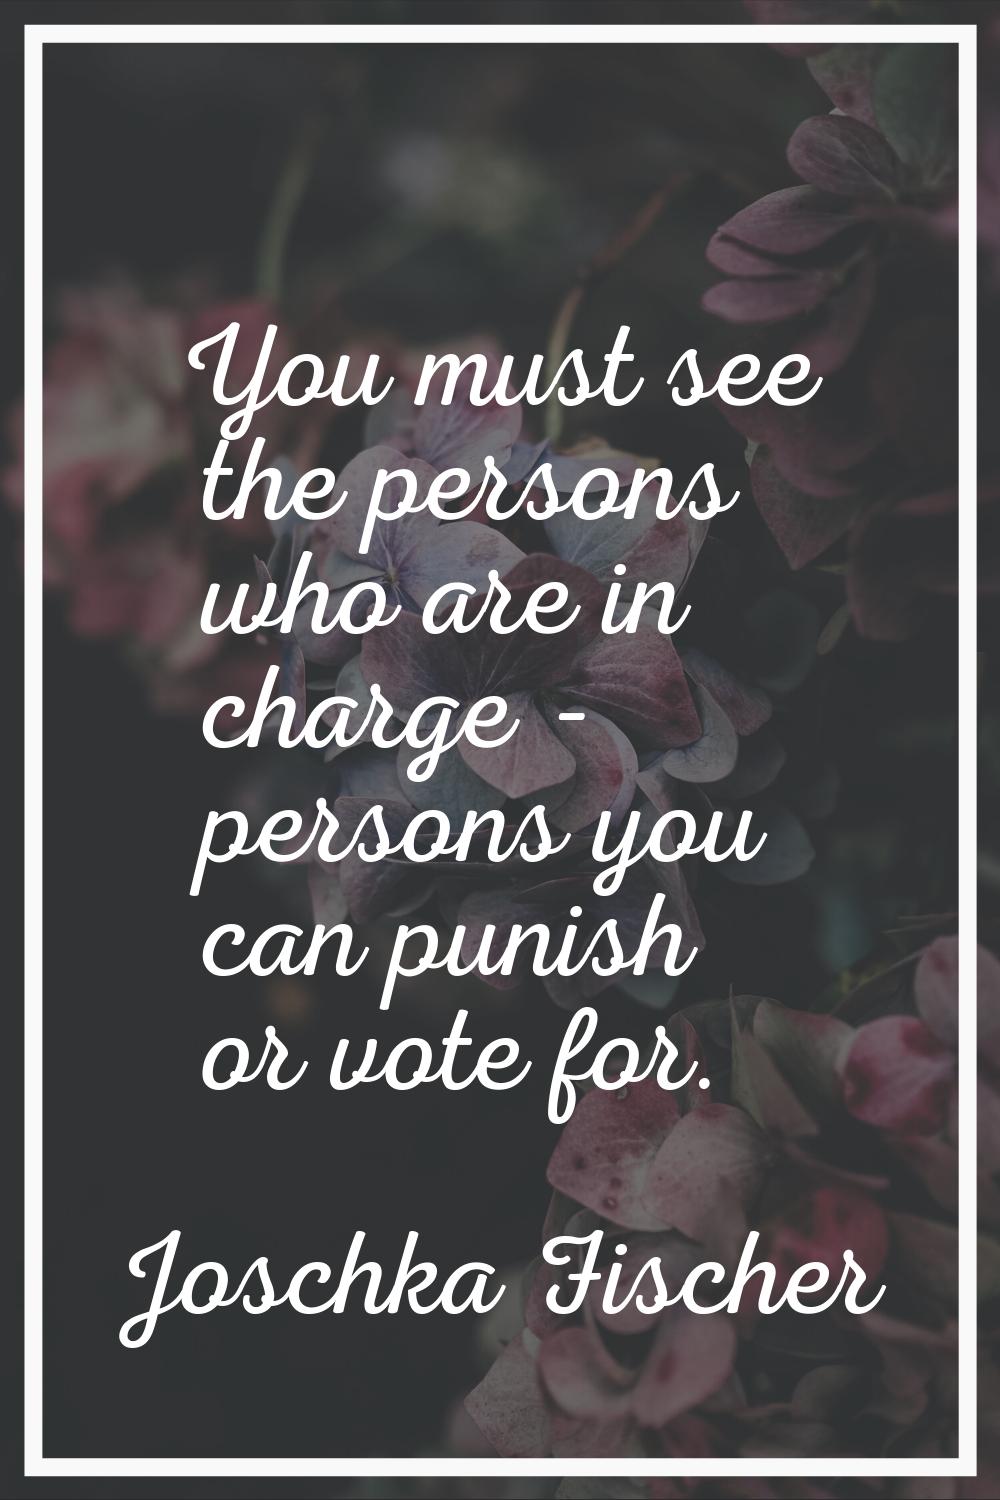 You must see the persons who are in charge - persons you can punish or vote for.